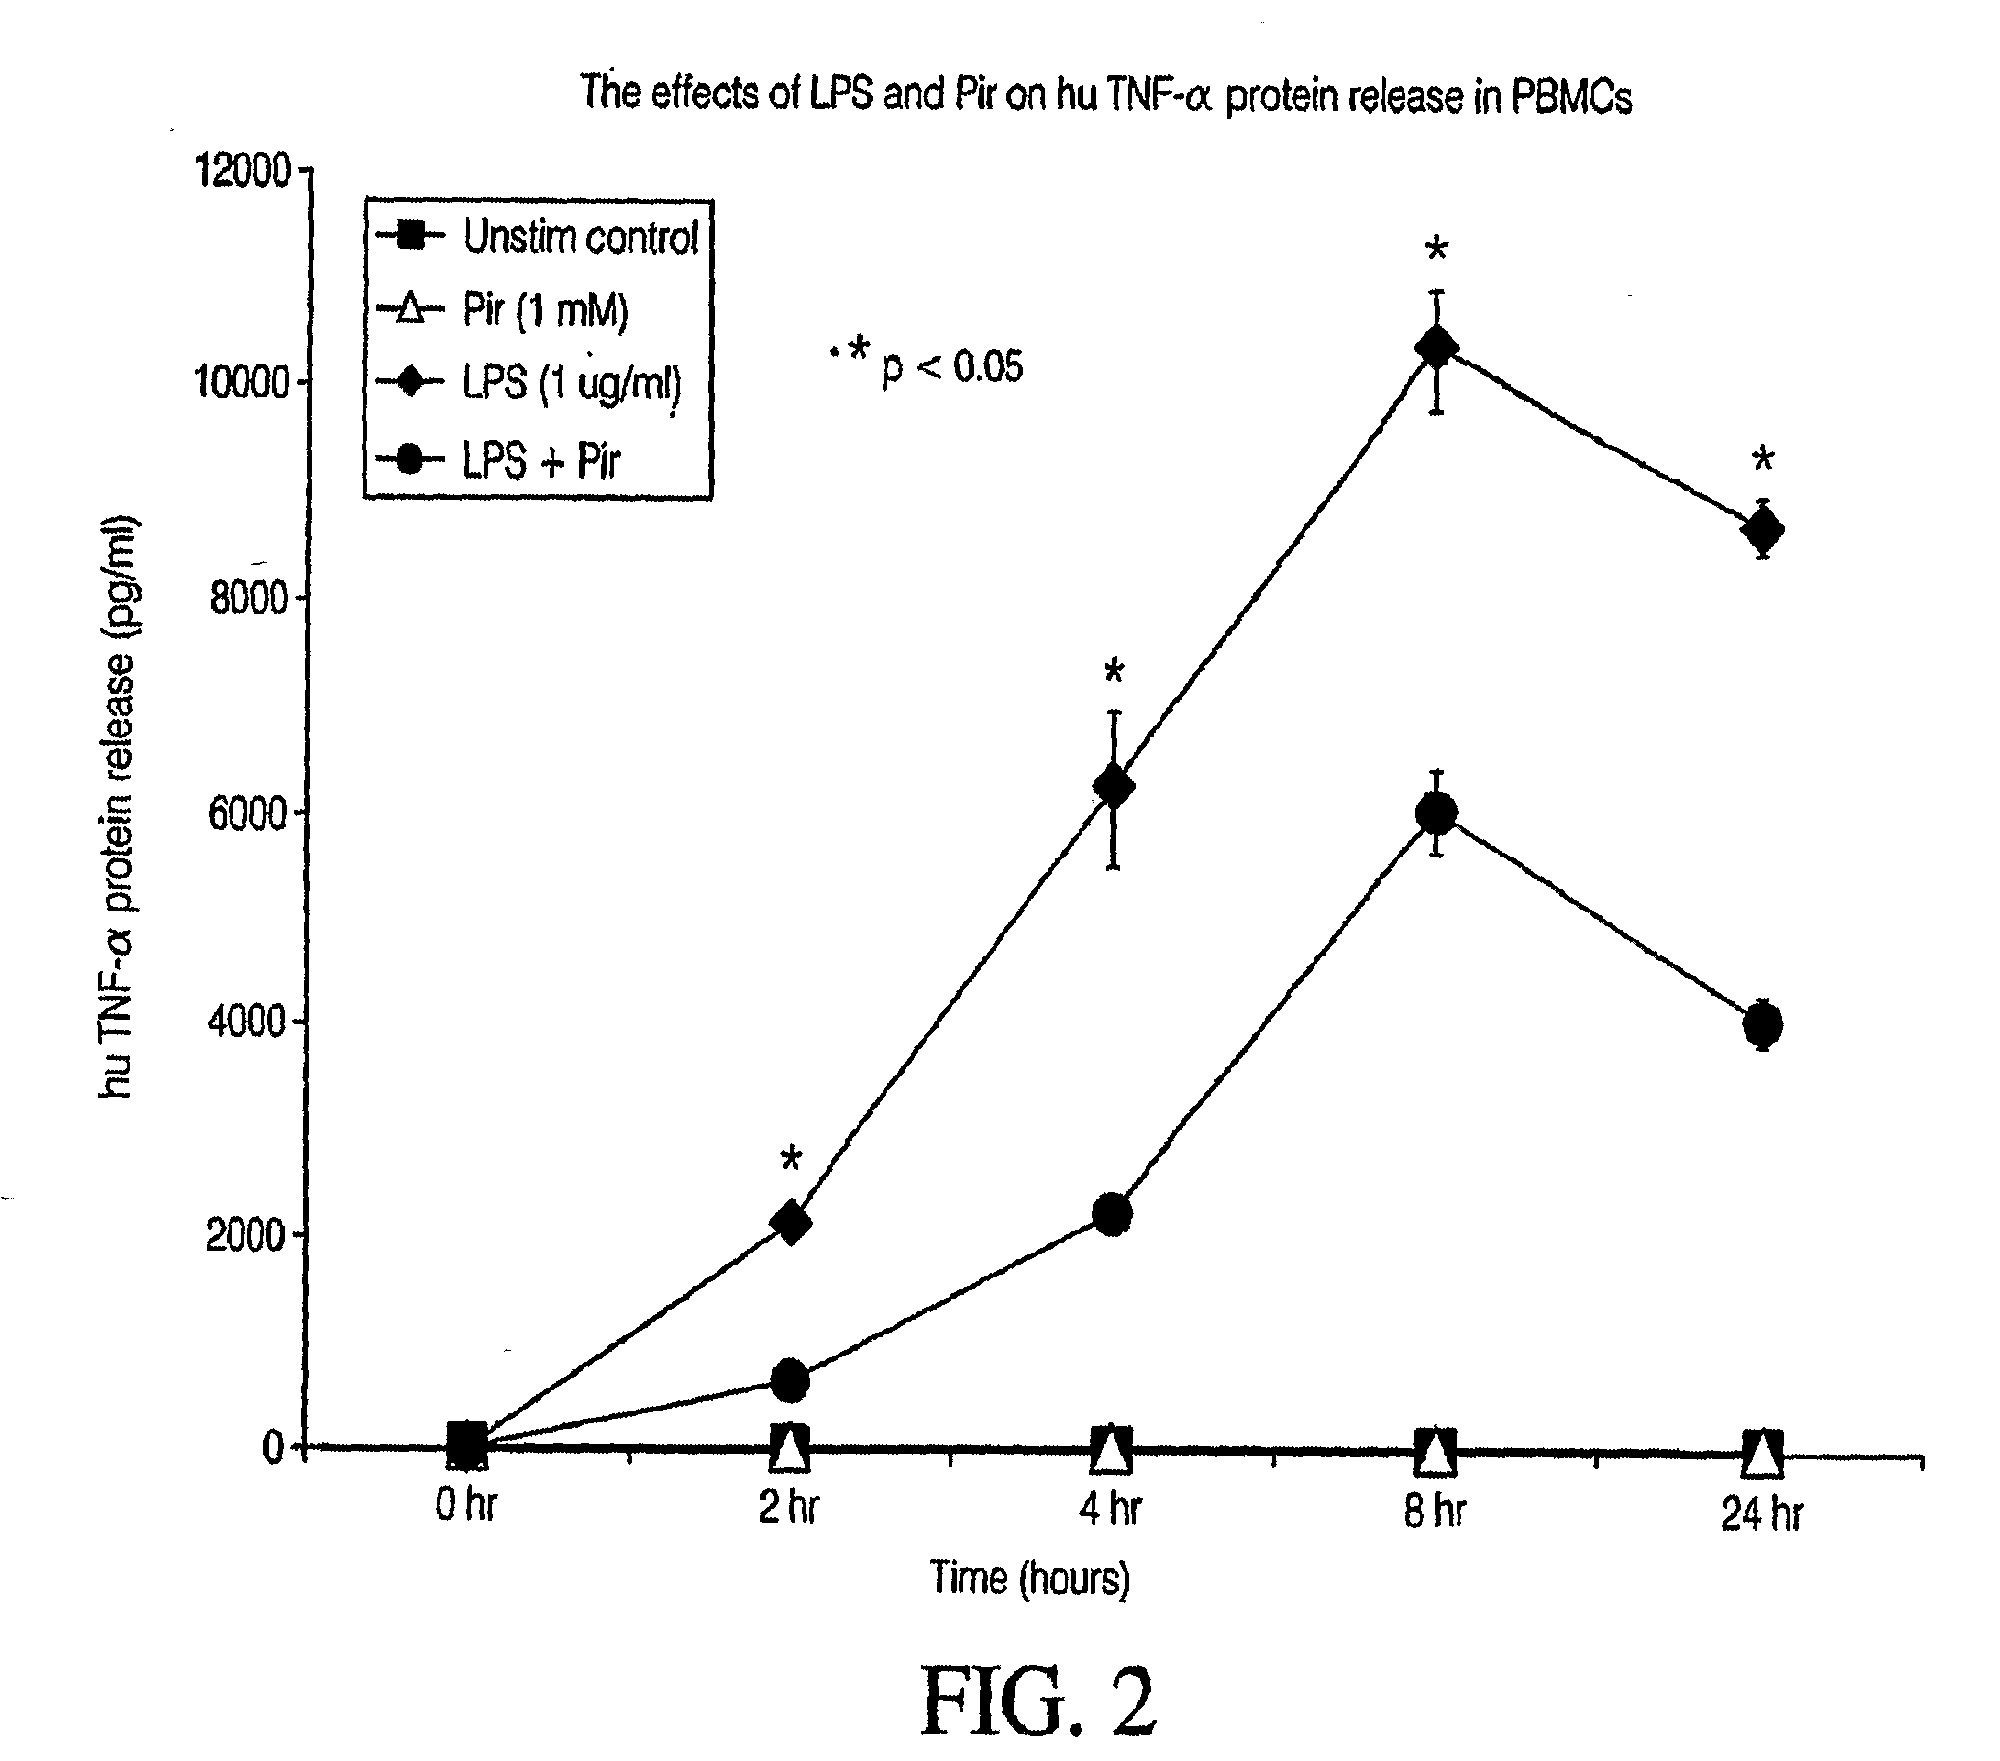 Pirfenidone/toll-like receptor (TLR) agonist compositions and methods for using them to stimulate production of granulocyte colonizing stimulating factor (g-csf)